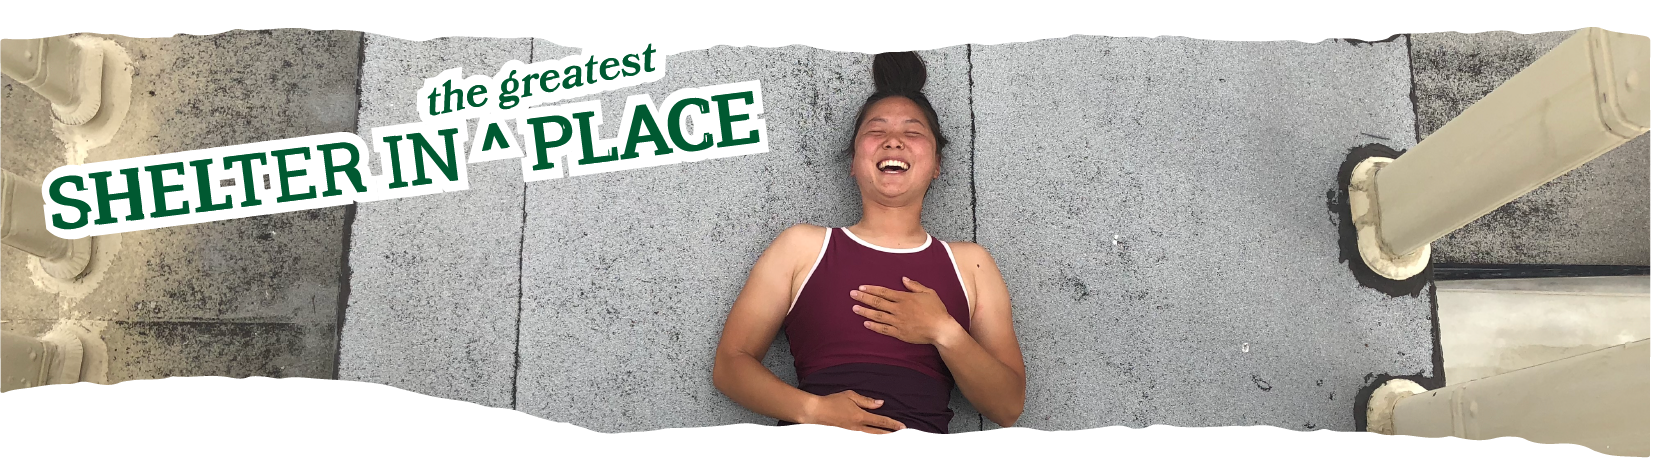 Title Text: Shelter in the Greatest Place laid over a photo of Margaret laughing in a yoga pose.